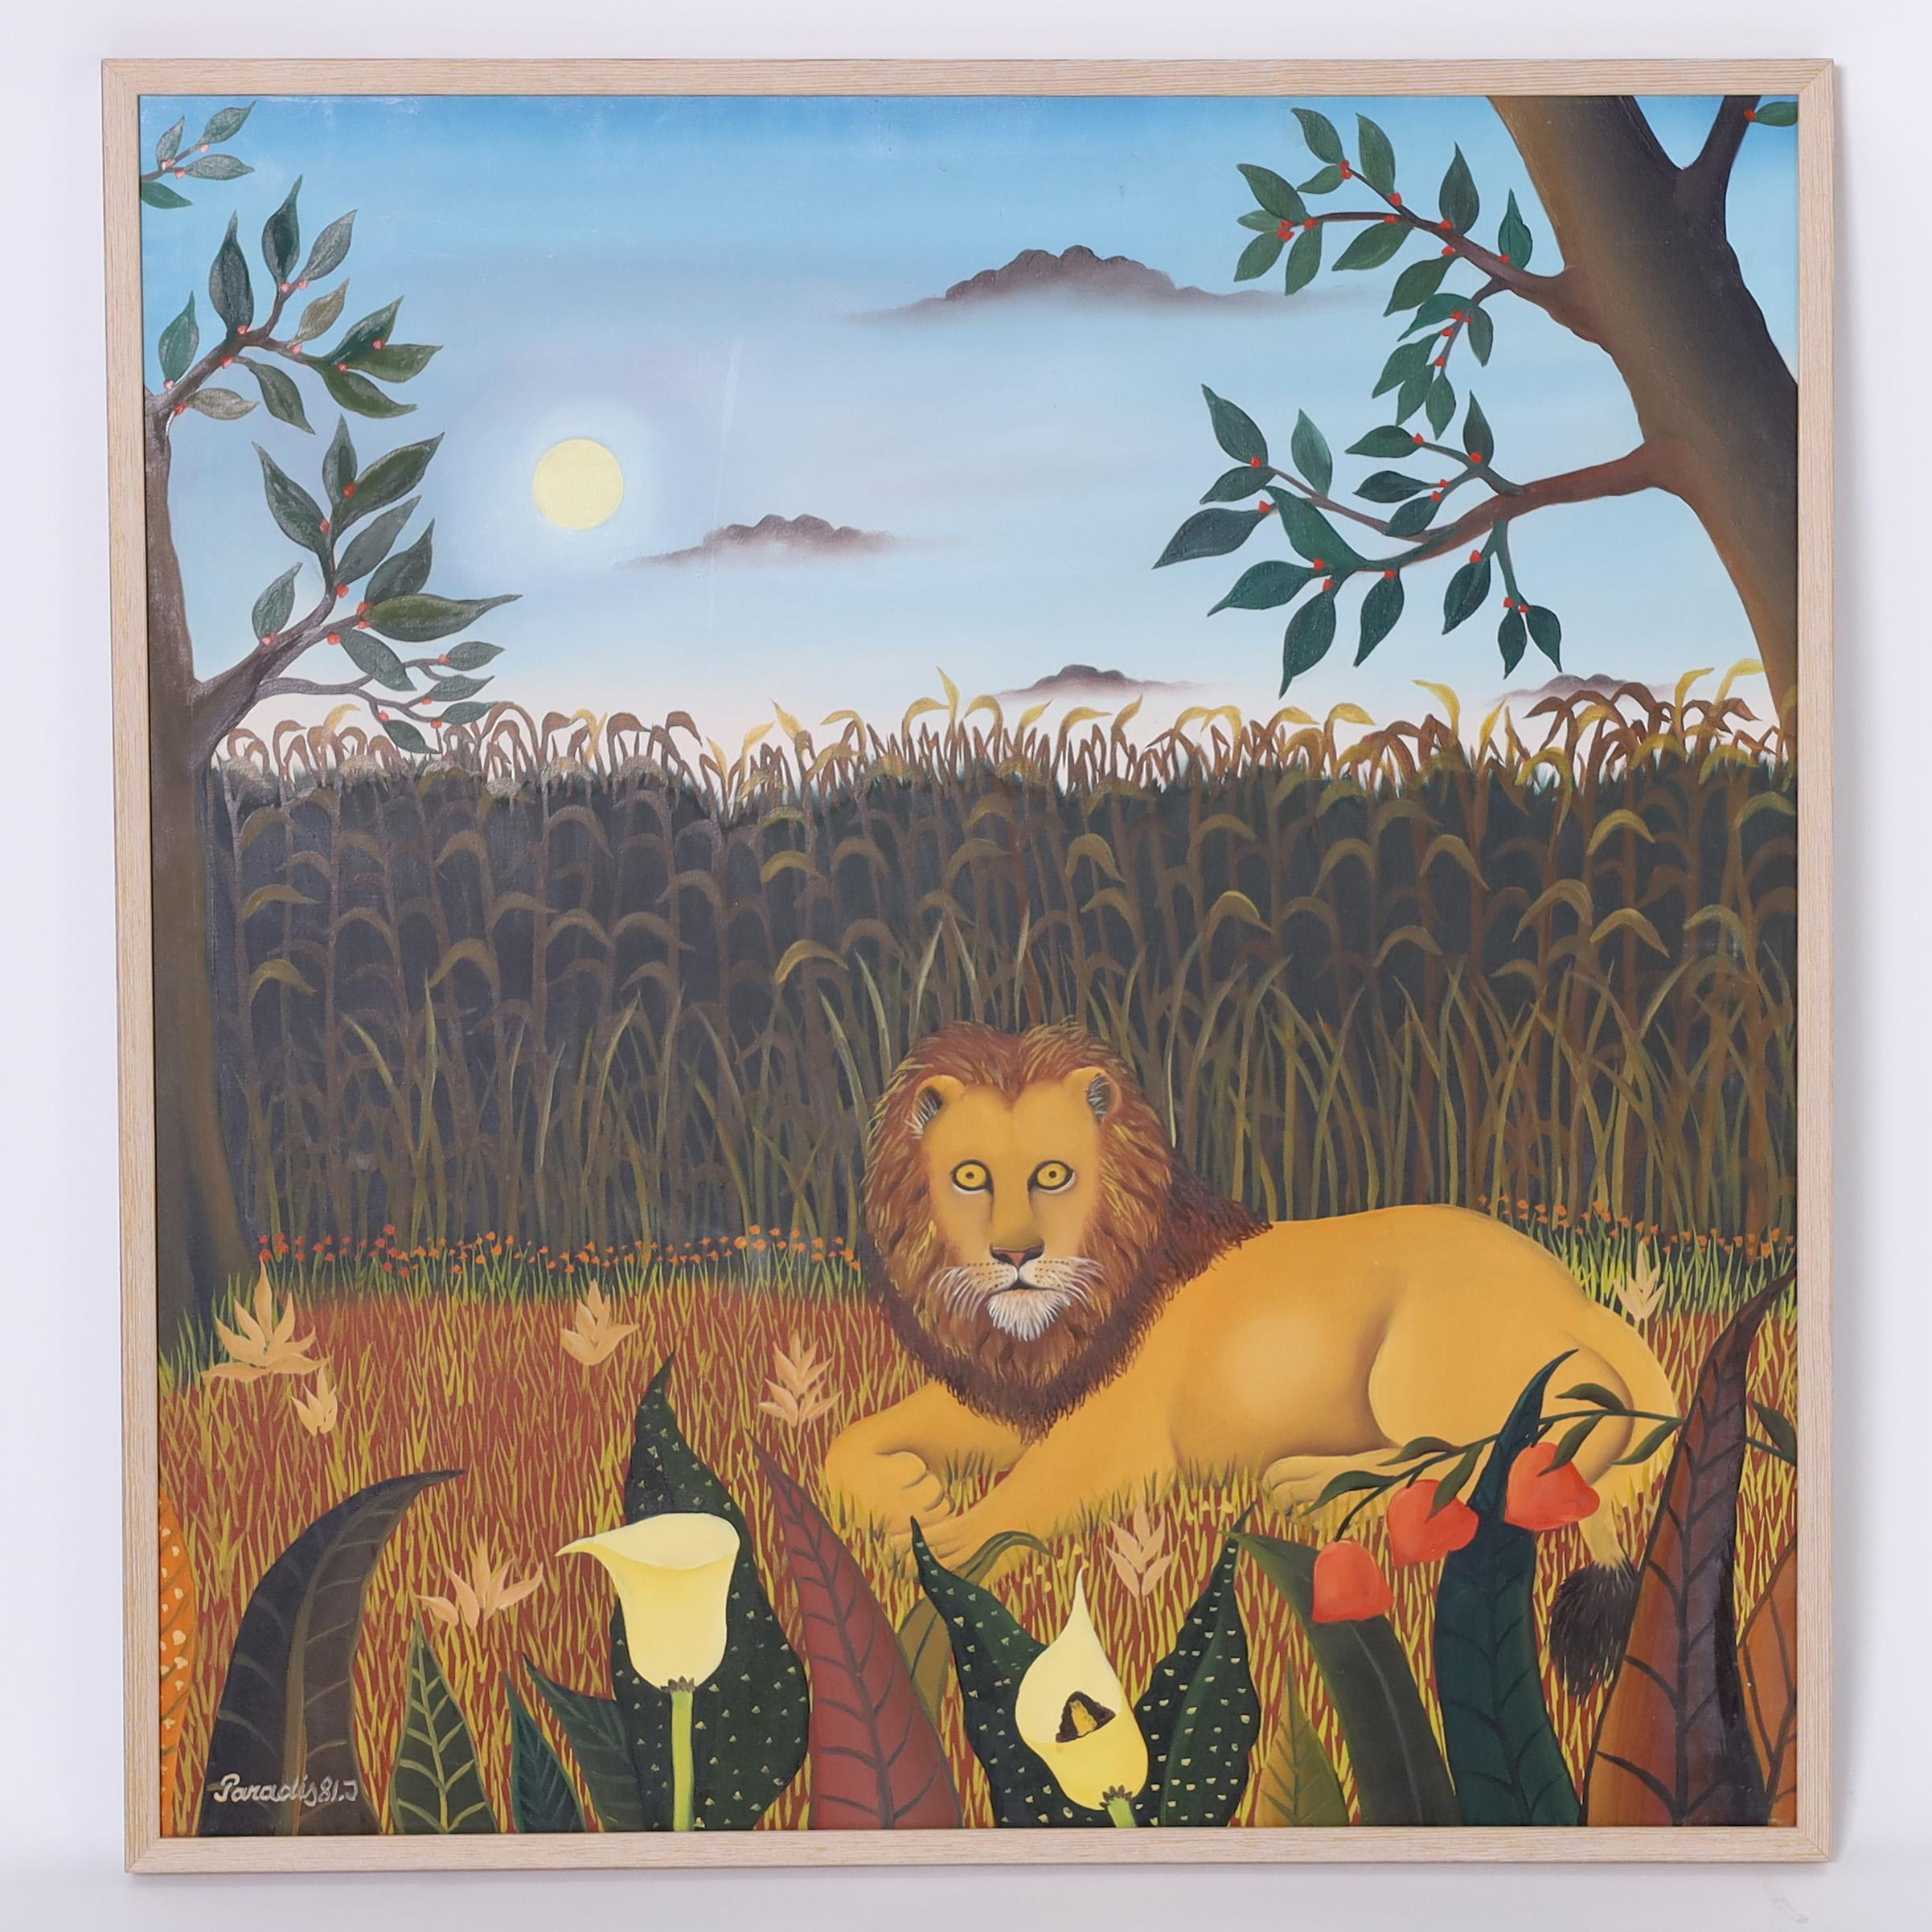 Standout acrylic painting on canvas of a panther eyeing some unsuspecting flamingos while a bird looks on, executed in a charming naive style. Signed paradis 81 and presented in a wood frame.